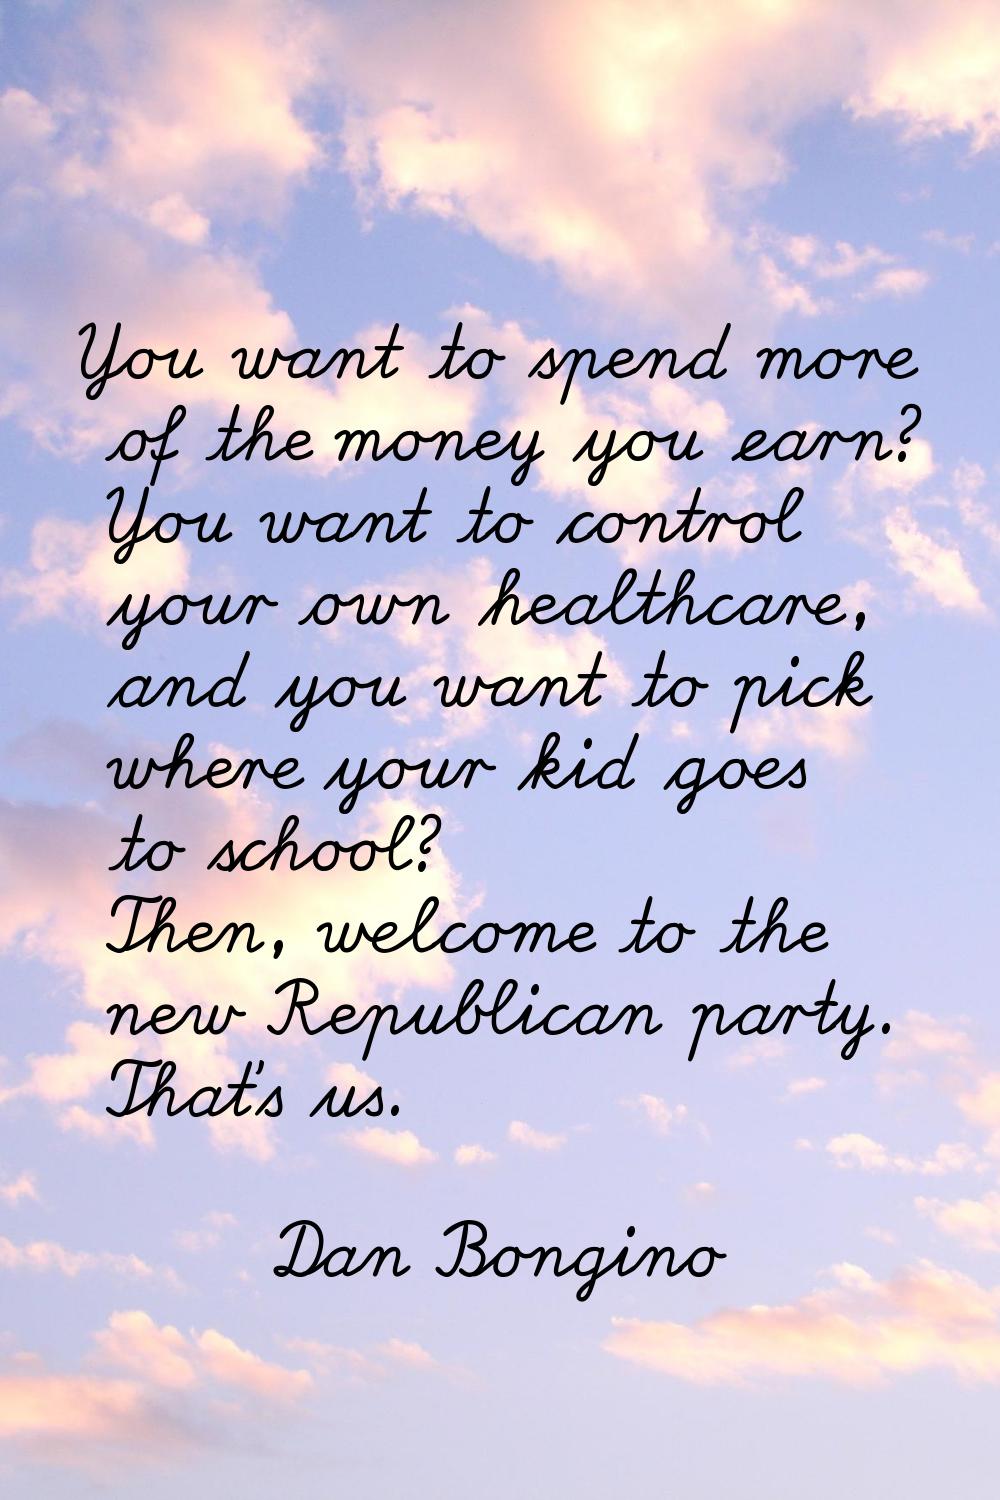 You want to spend more of the money you earn? You want to control your own healthcare, and you want